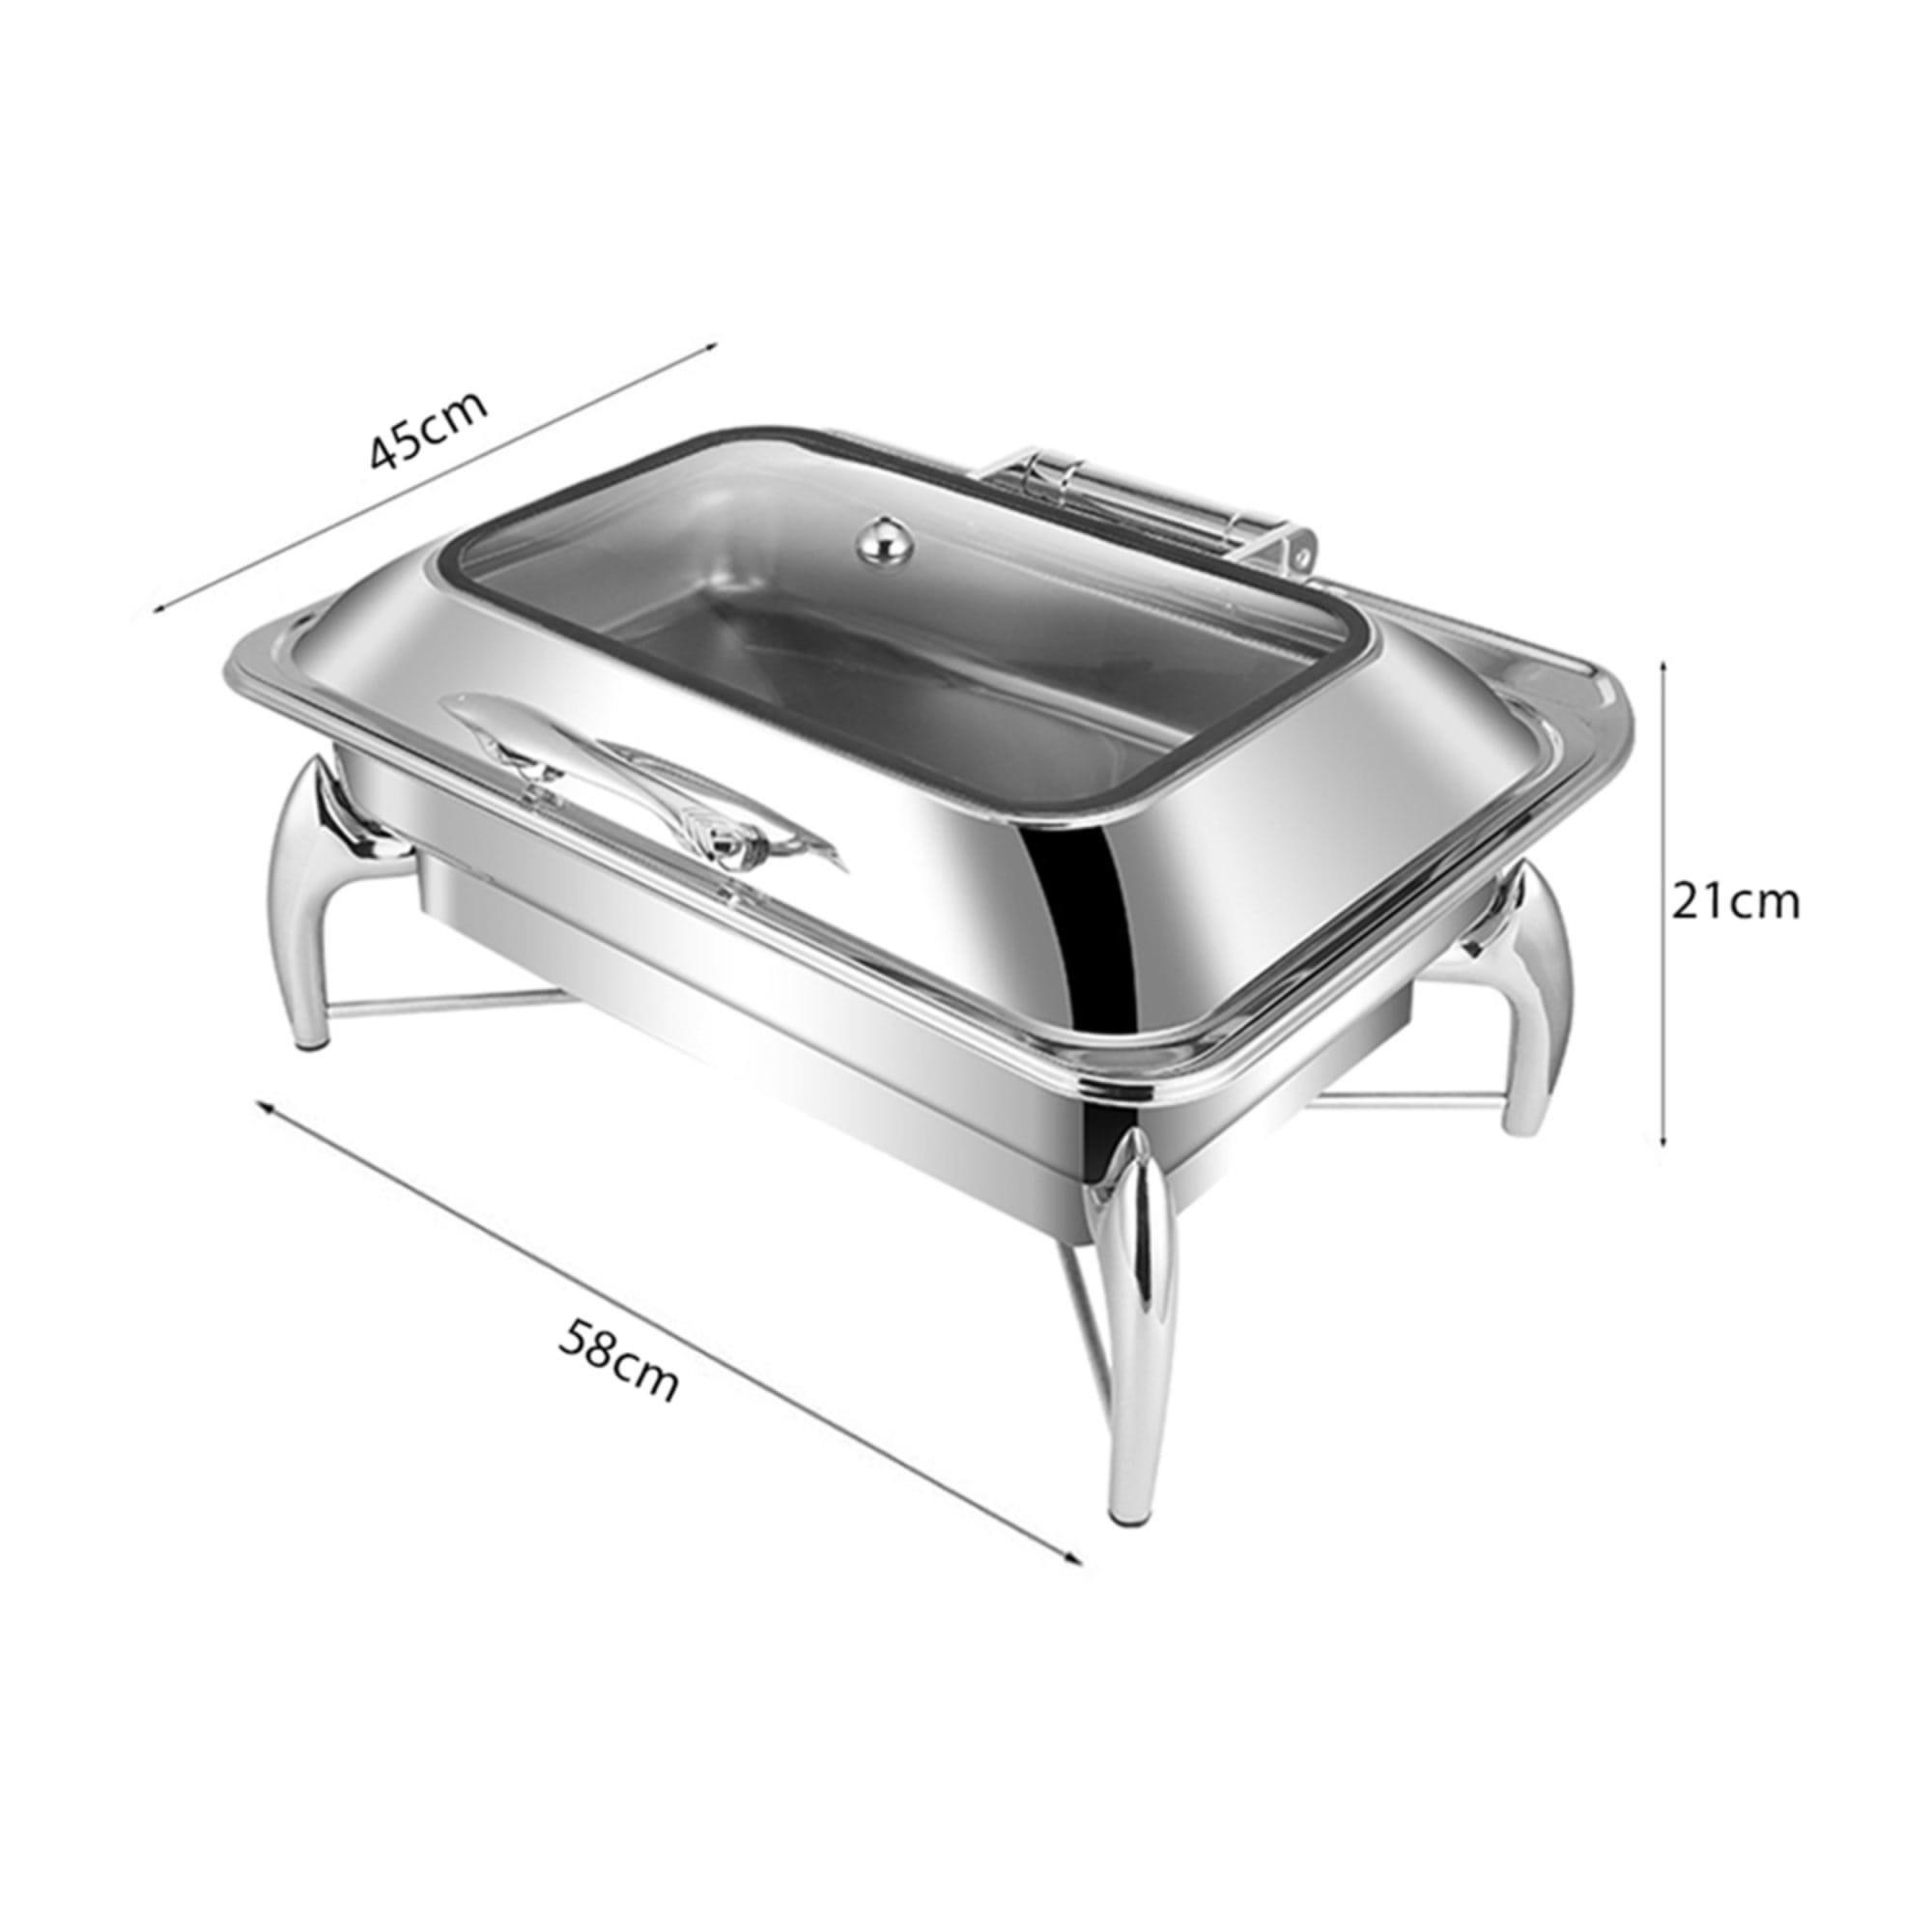 Soga Rectangular Stainless Steel Chafing Dish with Top Lid Image 8